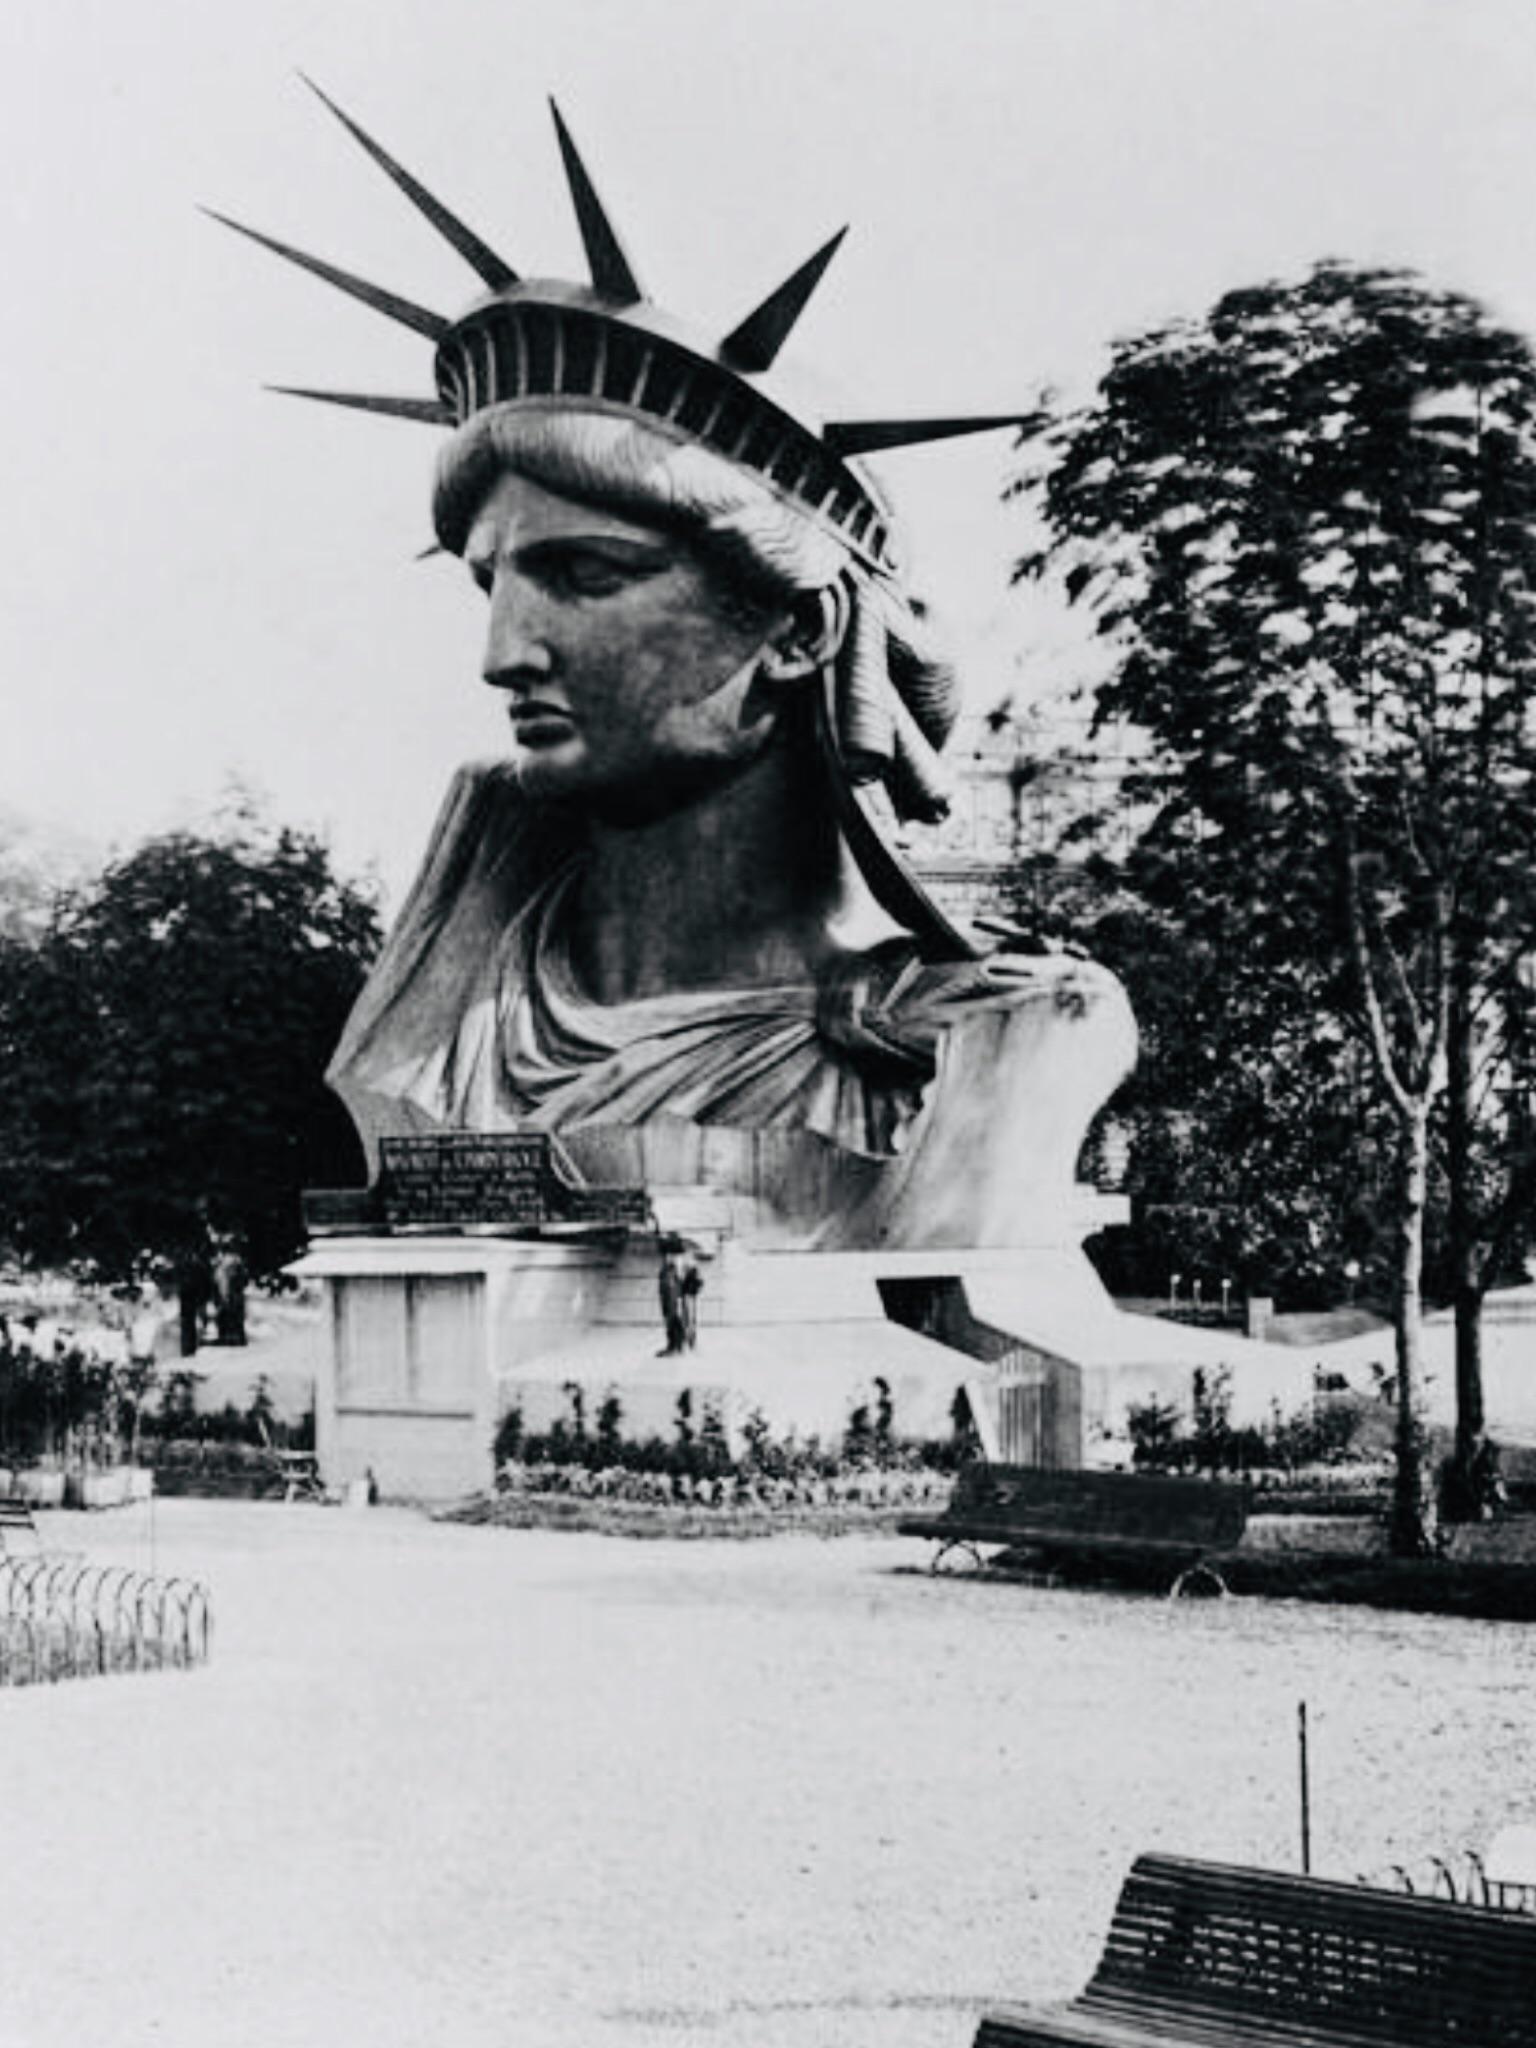 The Statue of Liberty's head on display at the Paris World's Fair - cicada 1878